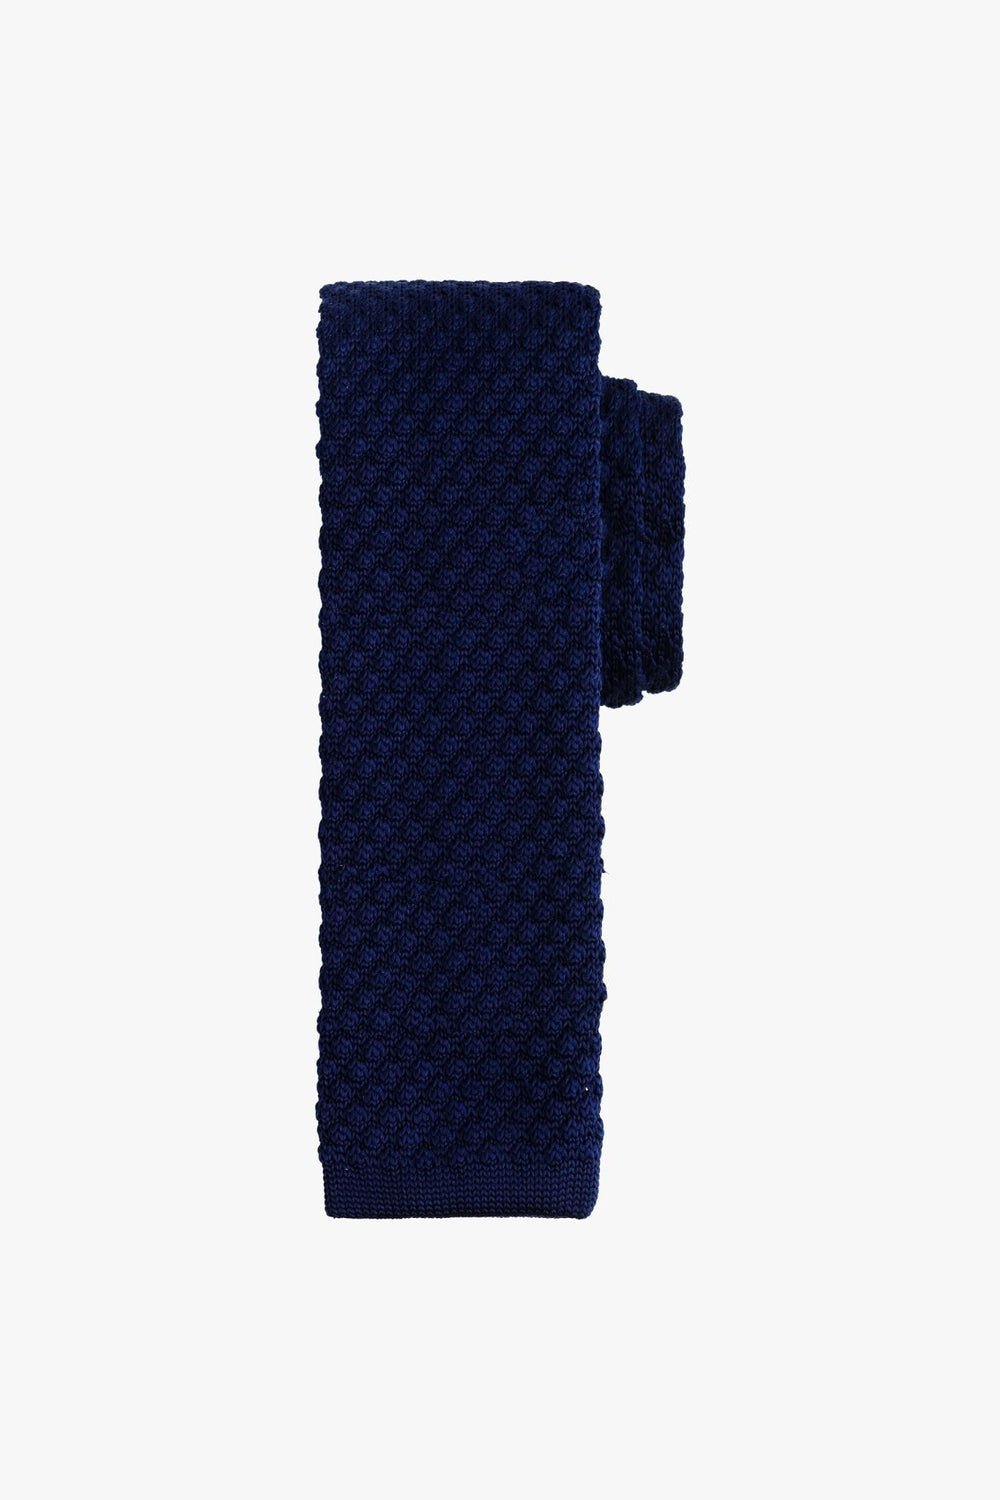 Navy Knitted Tie - My Suited Life